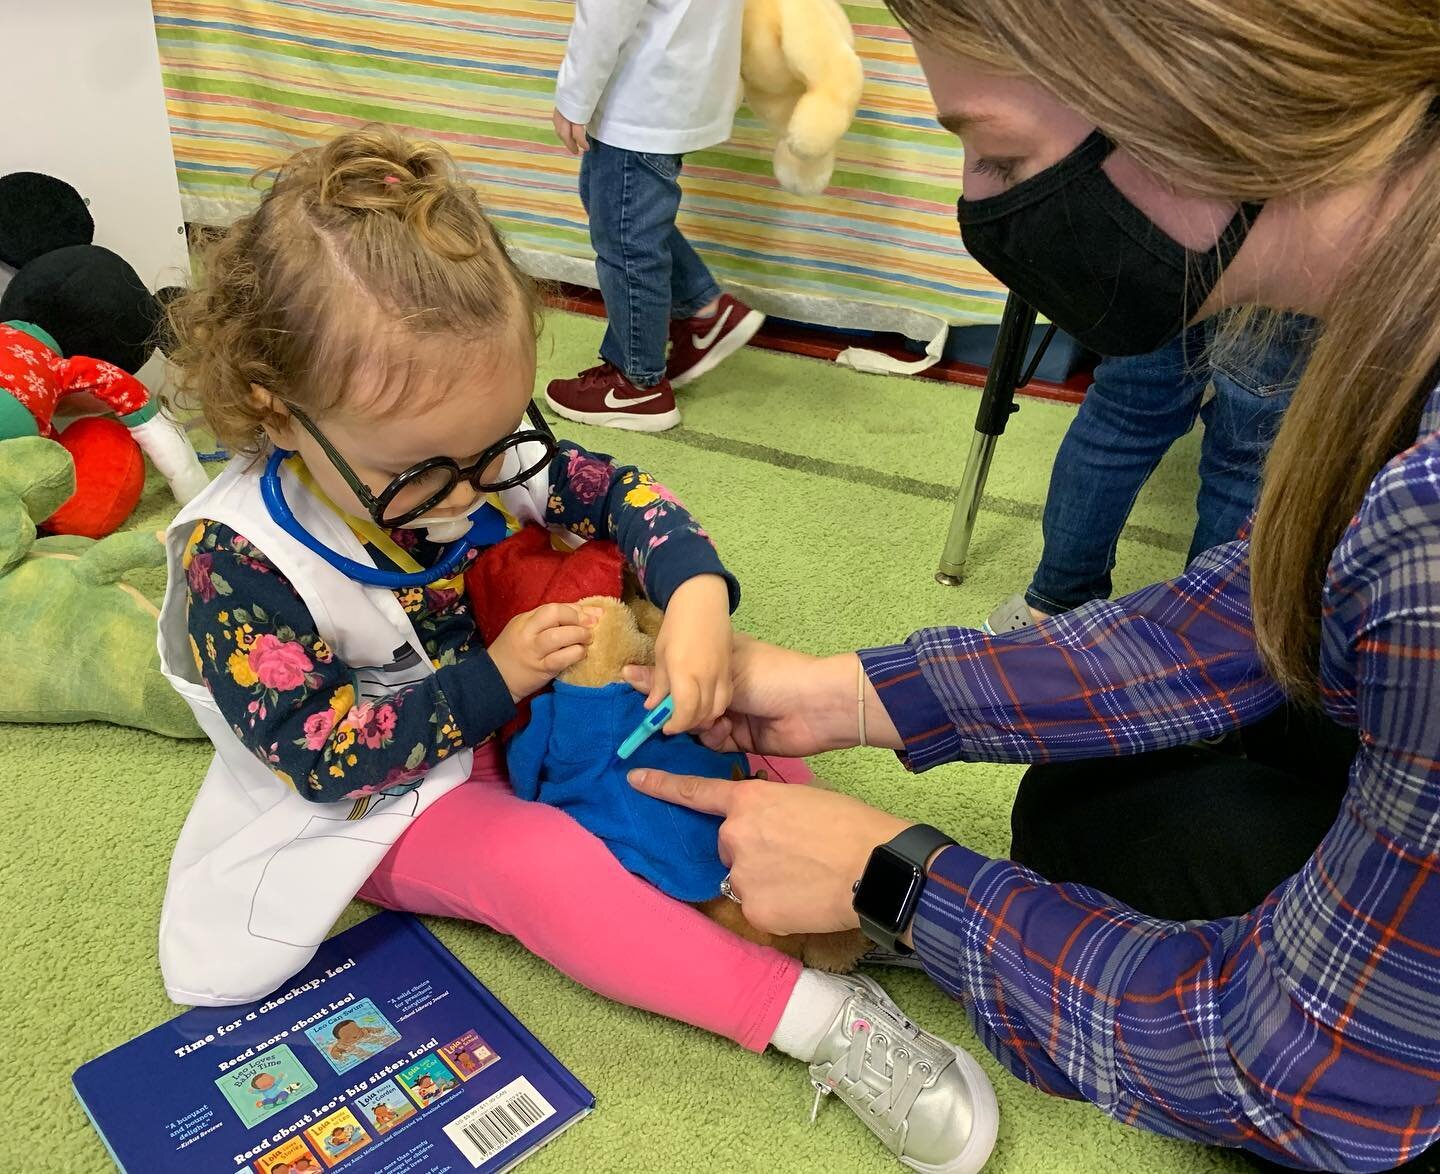 Scenes from today&rsquo;s Teddy Bear Checkup Clinic! 🧸💜🩺

#adoseofplay #toddlers #learningthroughplay #toddlersbelike but wait what&rsquo;s that car and castle over there 😂 #pretenddoctorplay #teddybearclinic #wilmingtonisland #childlifespecialis